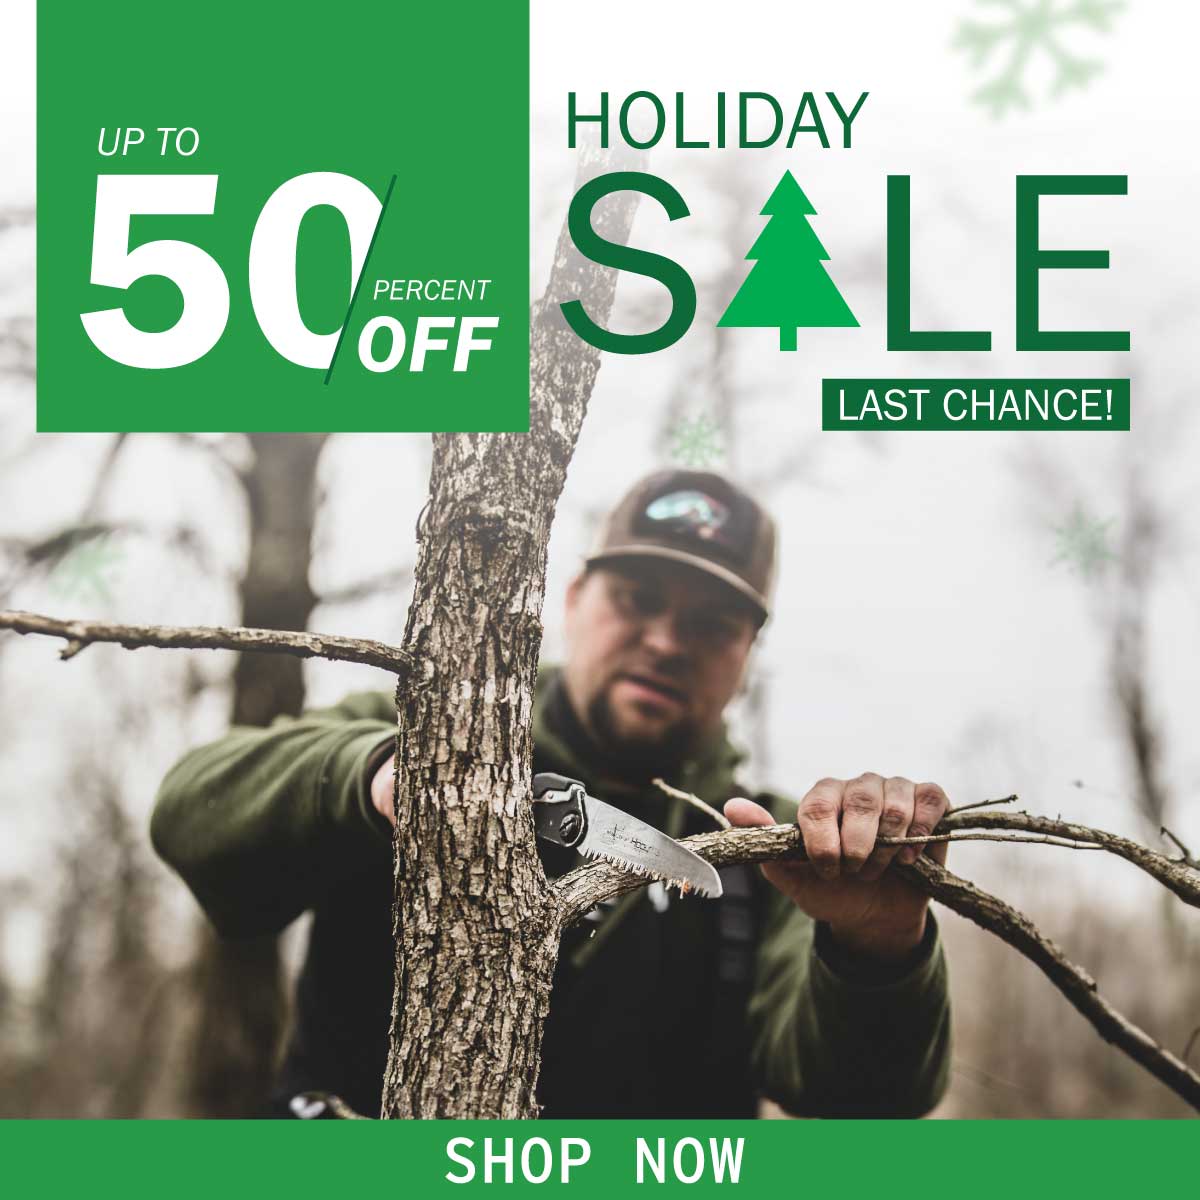 Holiday Sale - Up To 50% Off